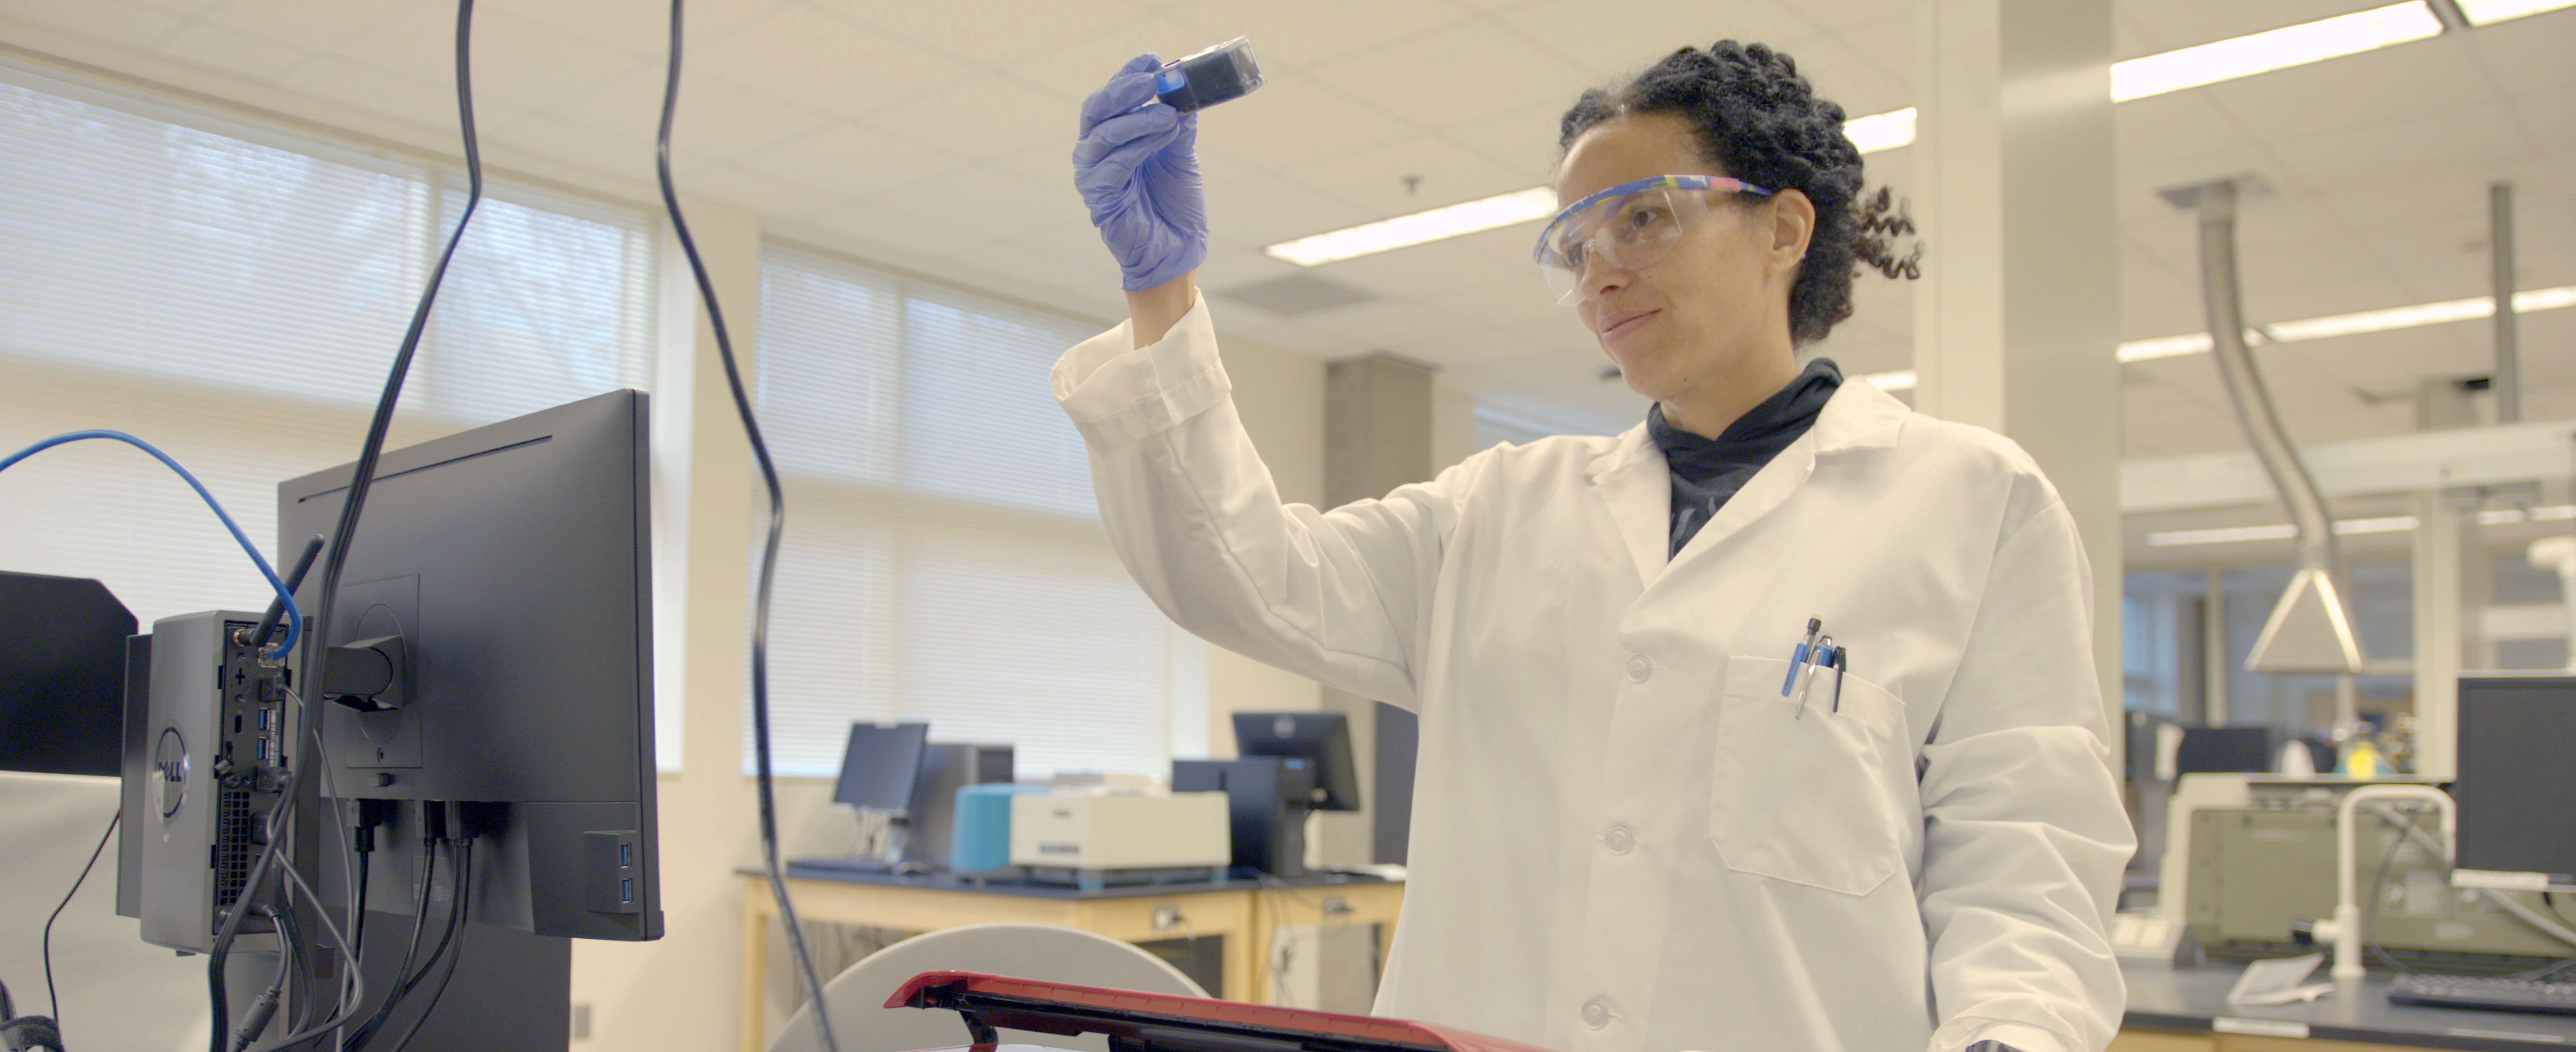 Chemist Raychelle Burks examines a sample while working in a lab